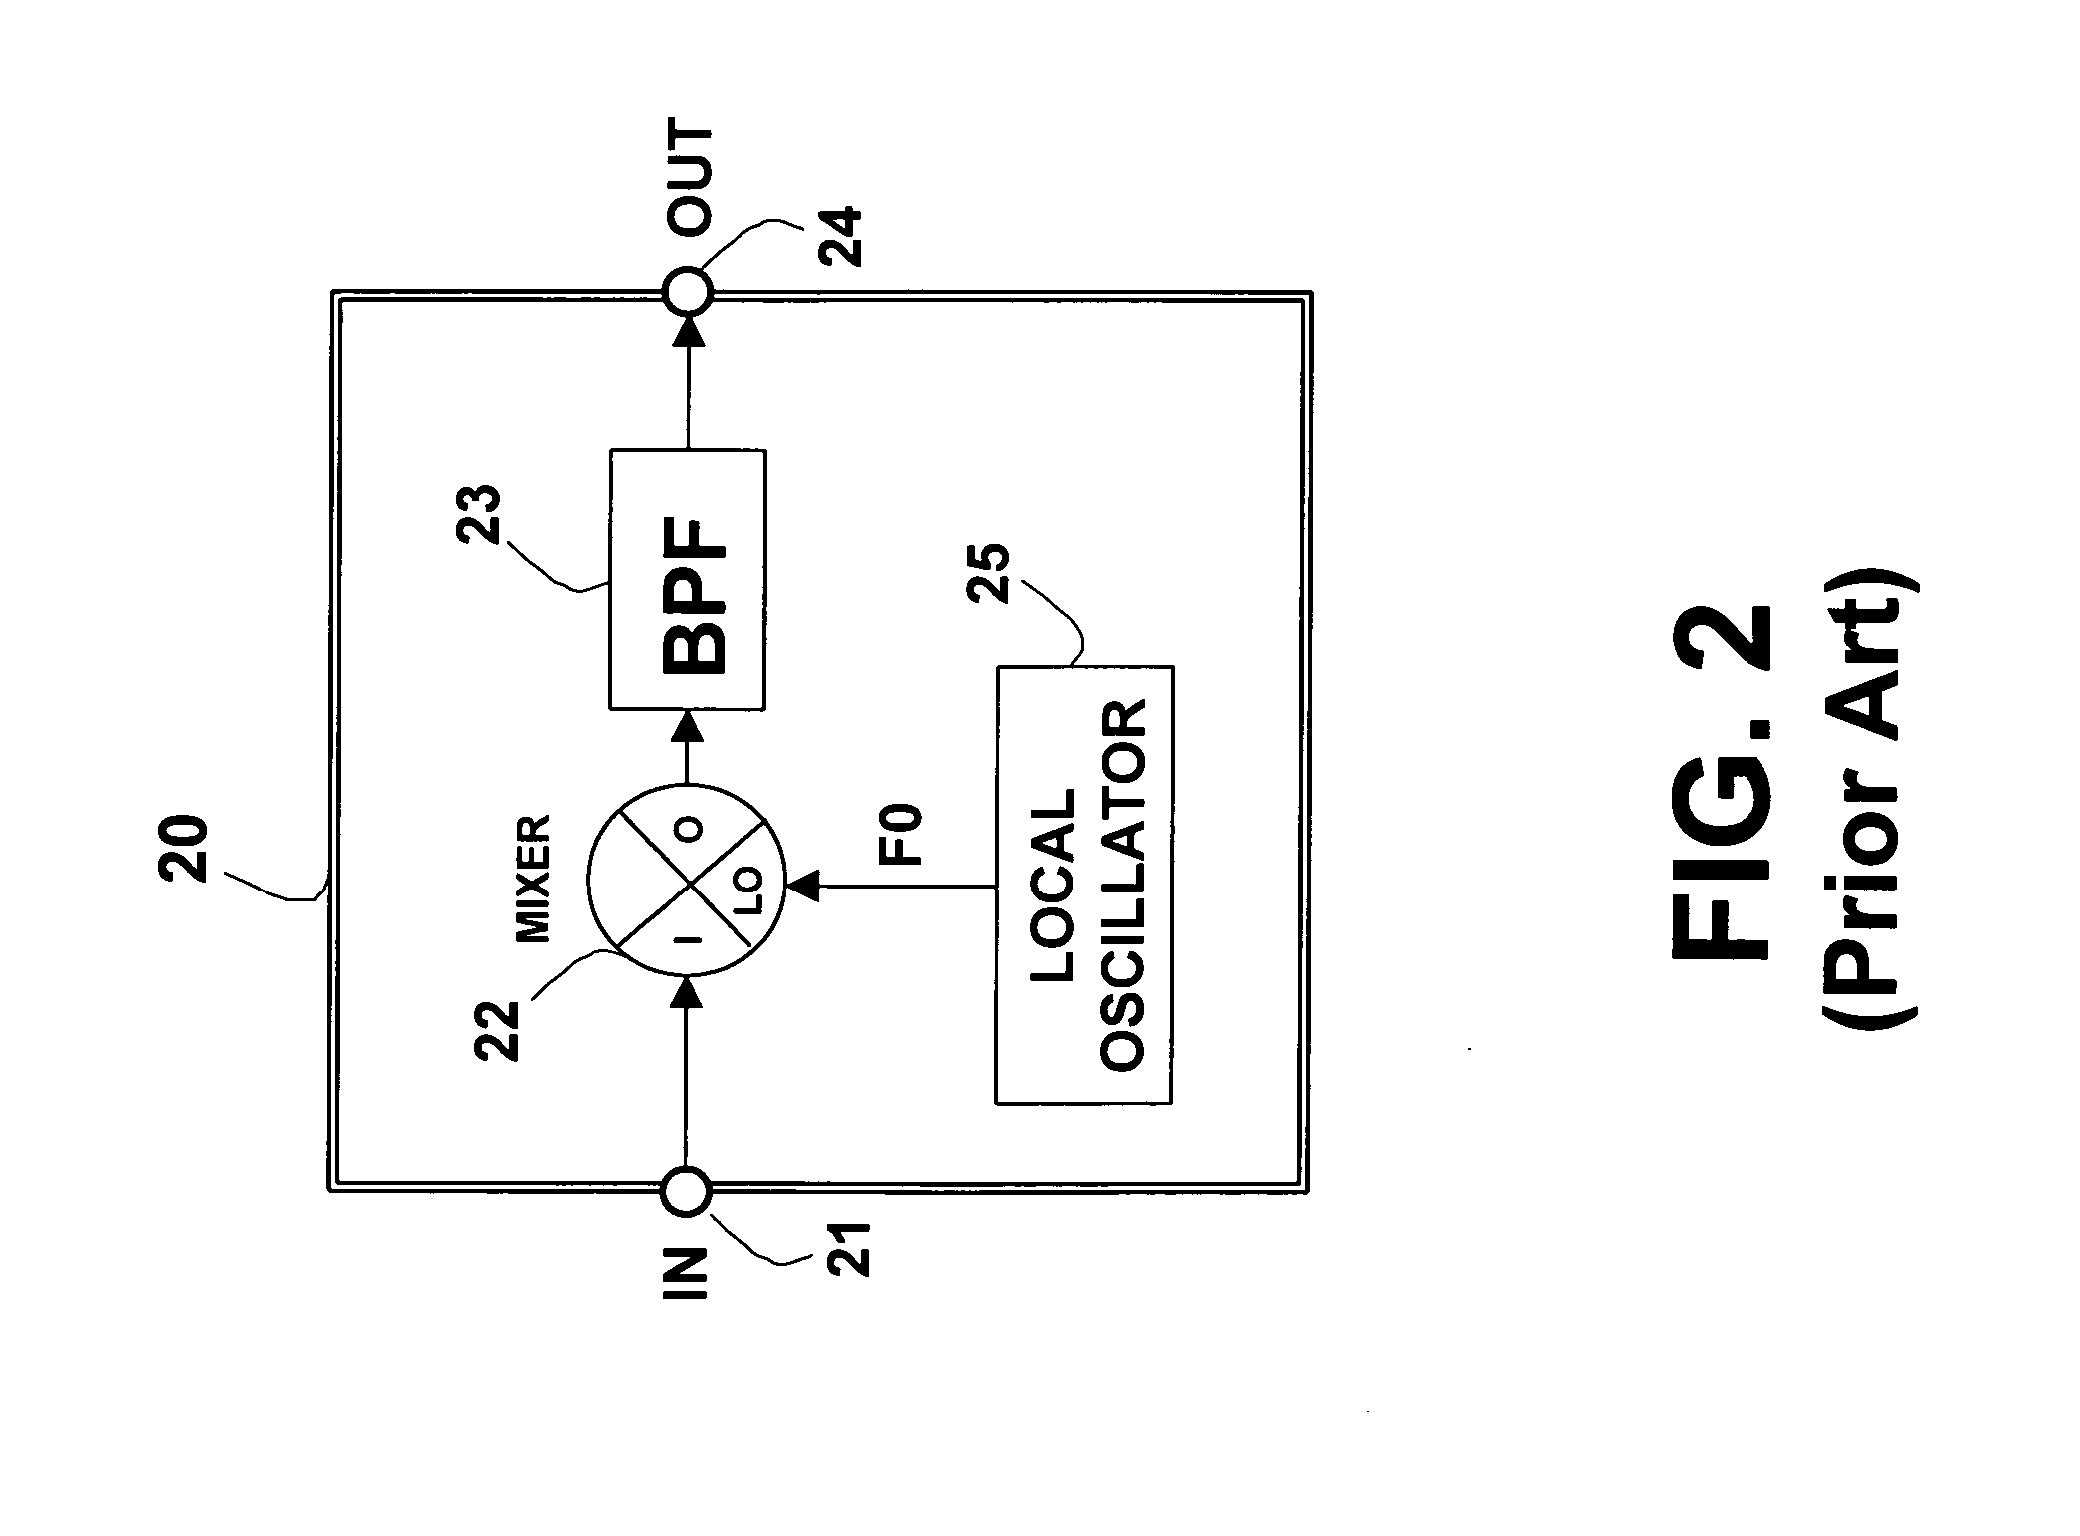 Apparatus and method for frequency shifting of a wireless signal and systems using frequency shifting